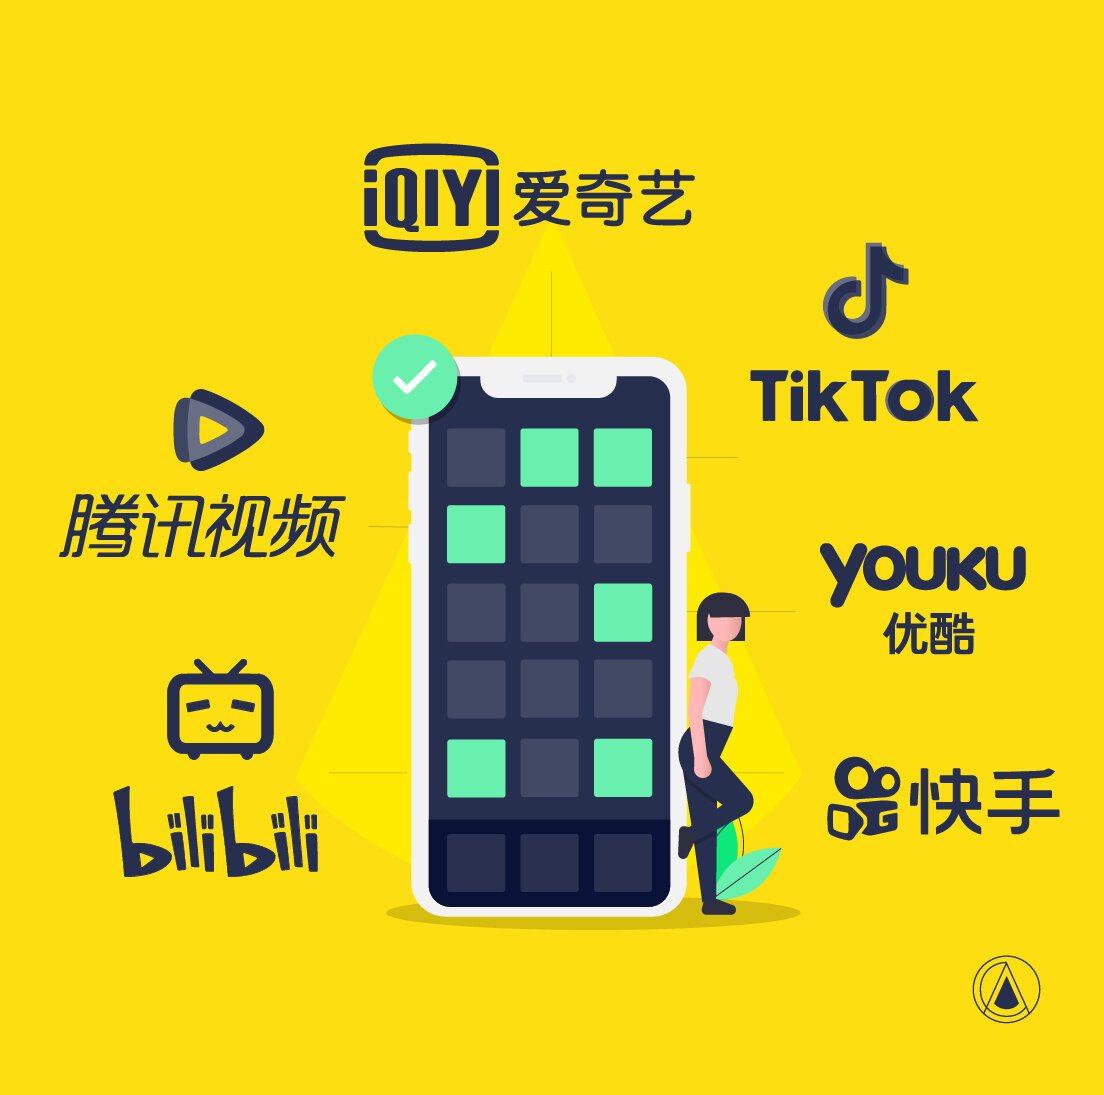 Douyin, Bili Bili + 4 Other Chinese Online Video Platforms You Need to Know About for 2021 — CATALYST AGENTS